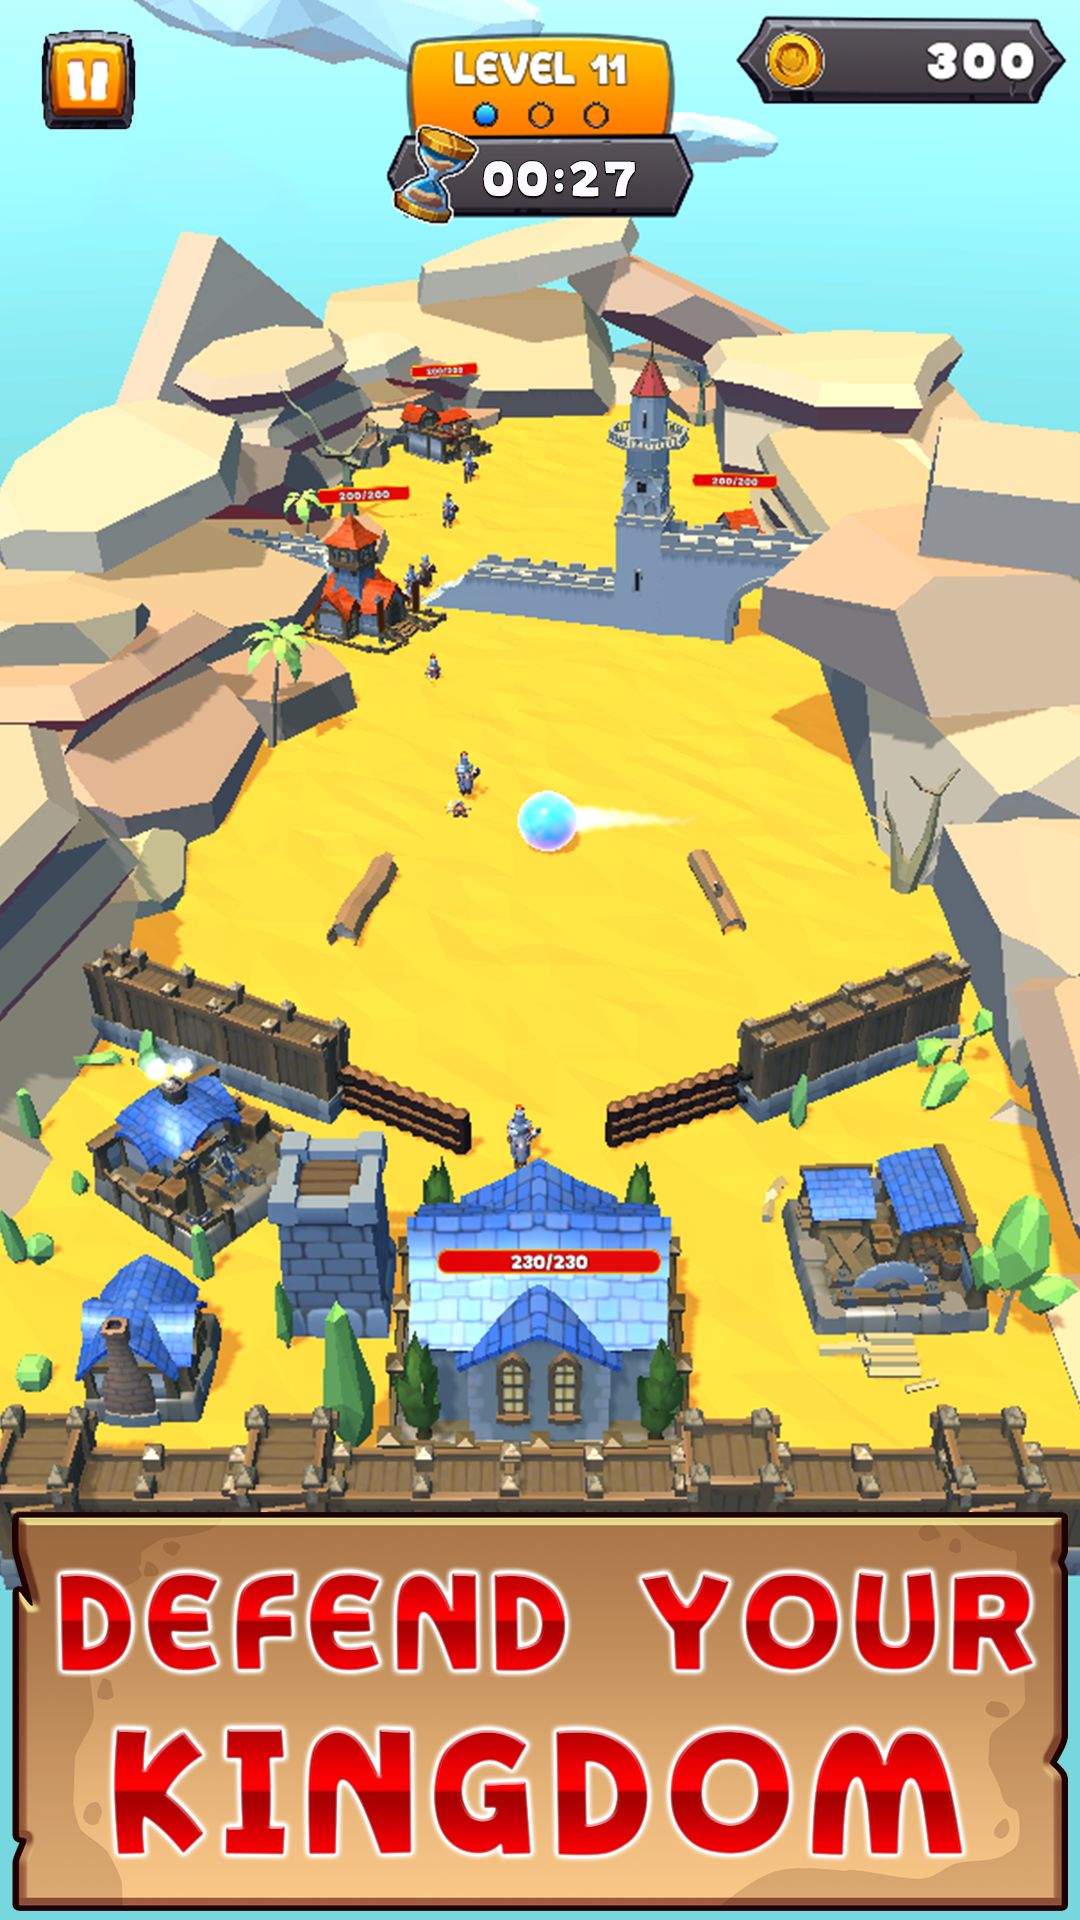 Full version of Android apk Pinball Kingdom: Tower Defense for tablet and phone.